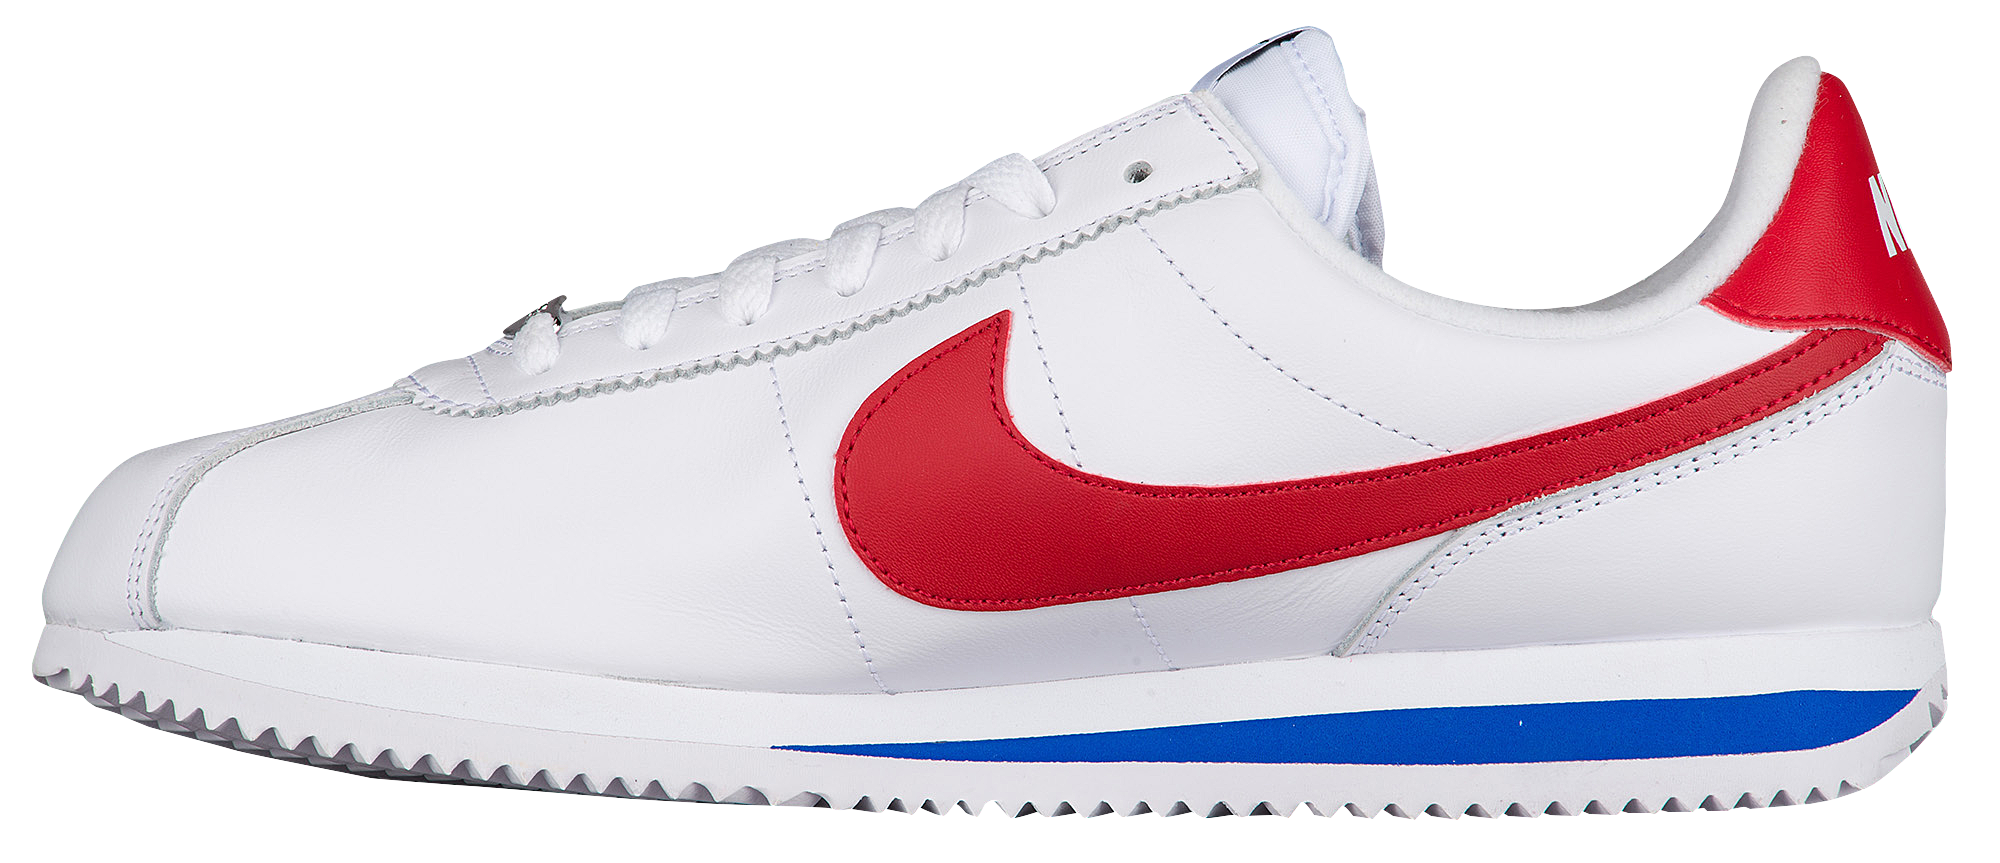 pink and blue nike cortez